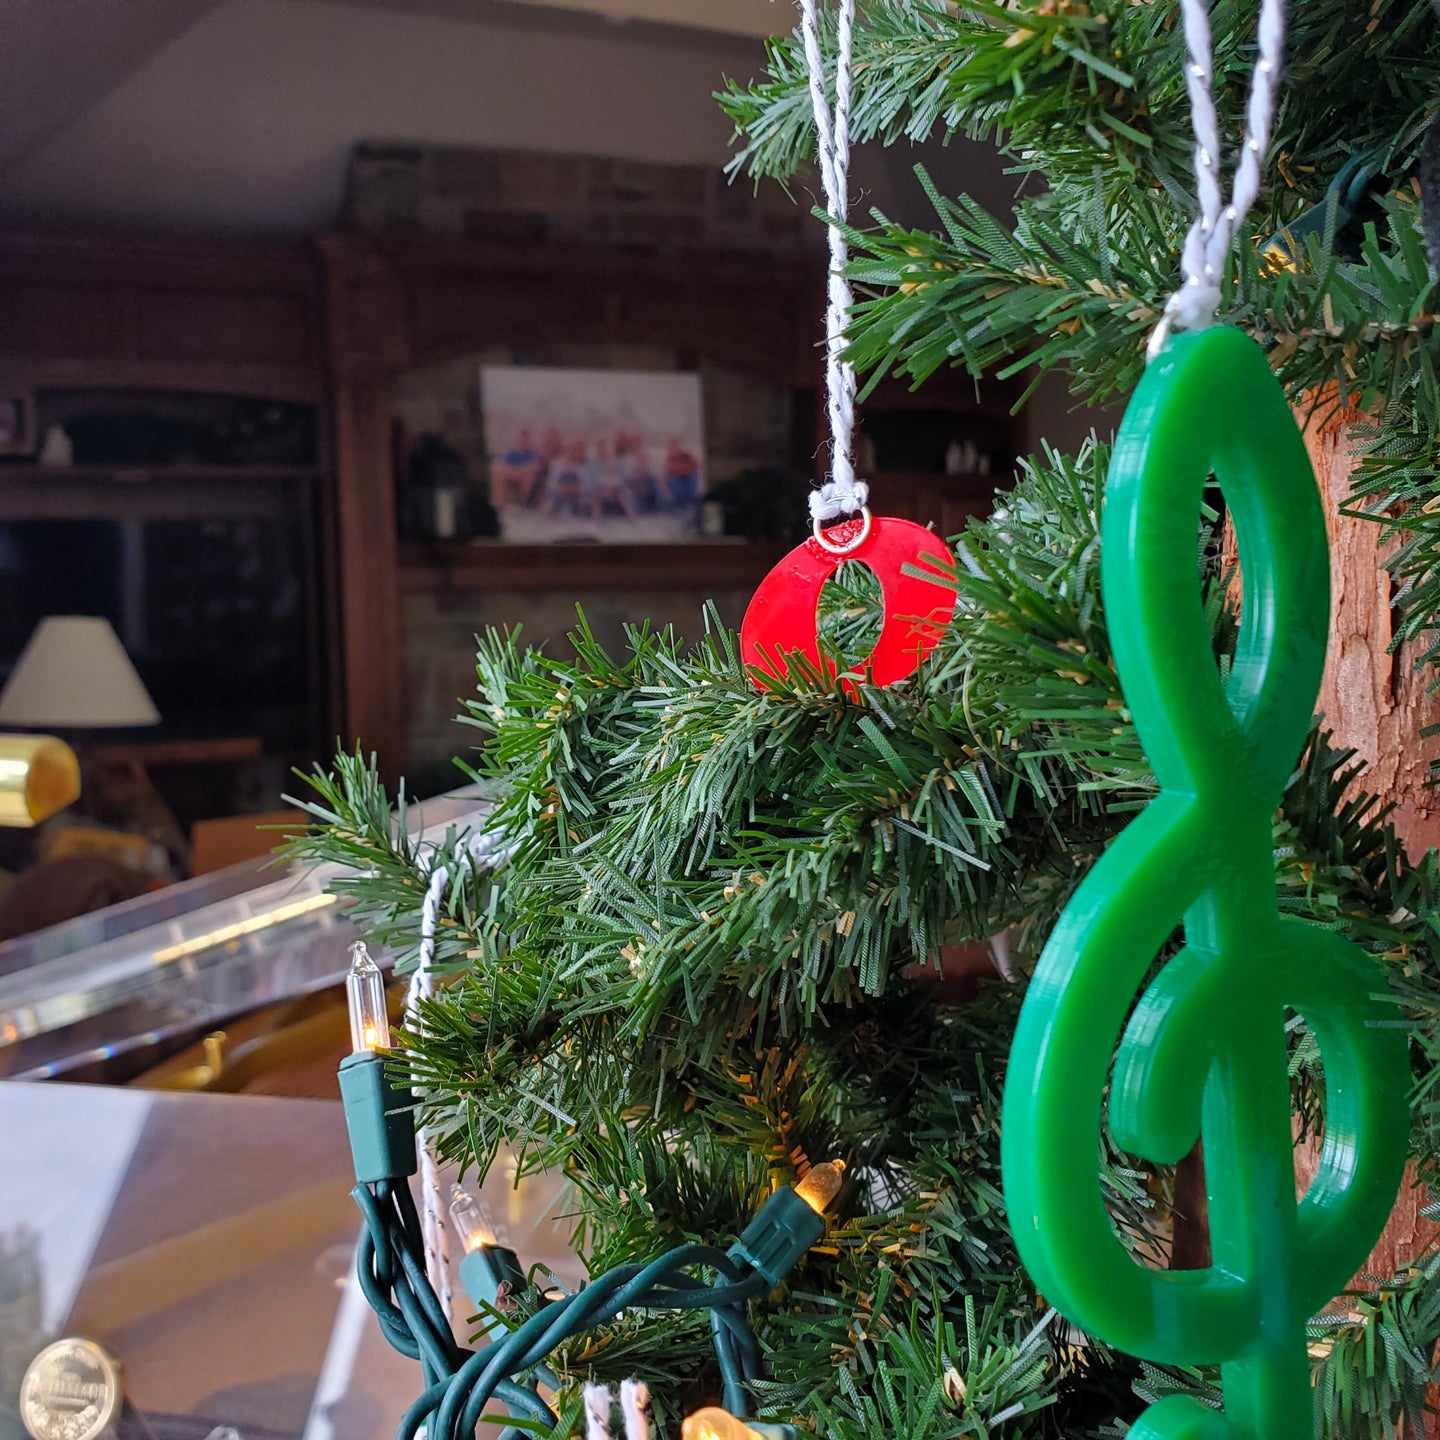 Holiday Music Ornaments